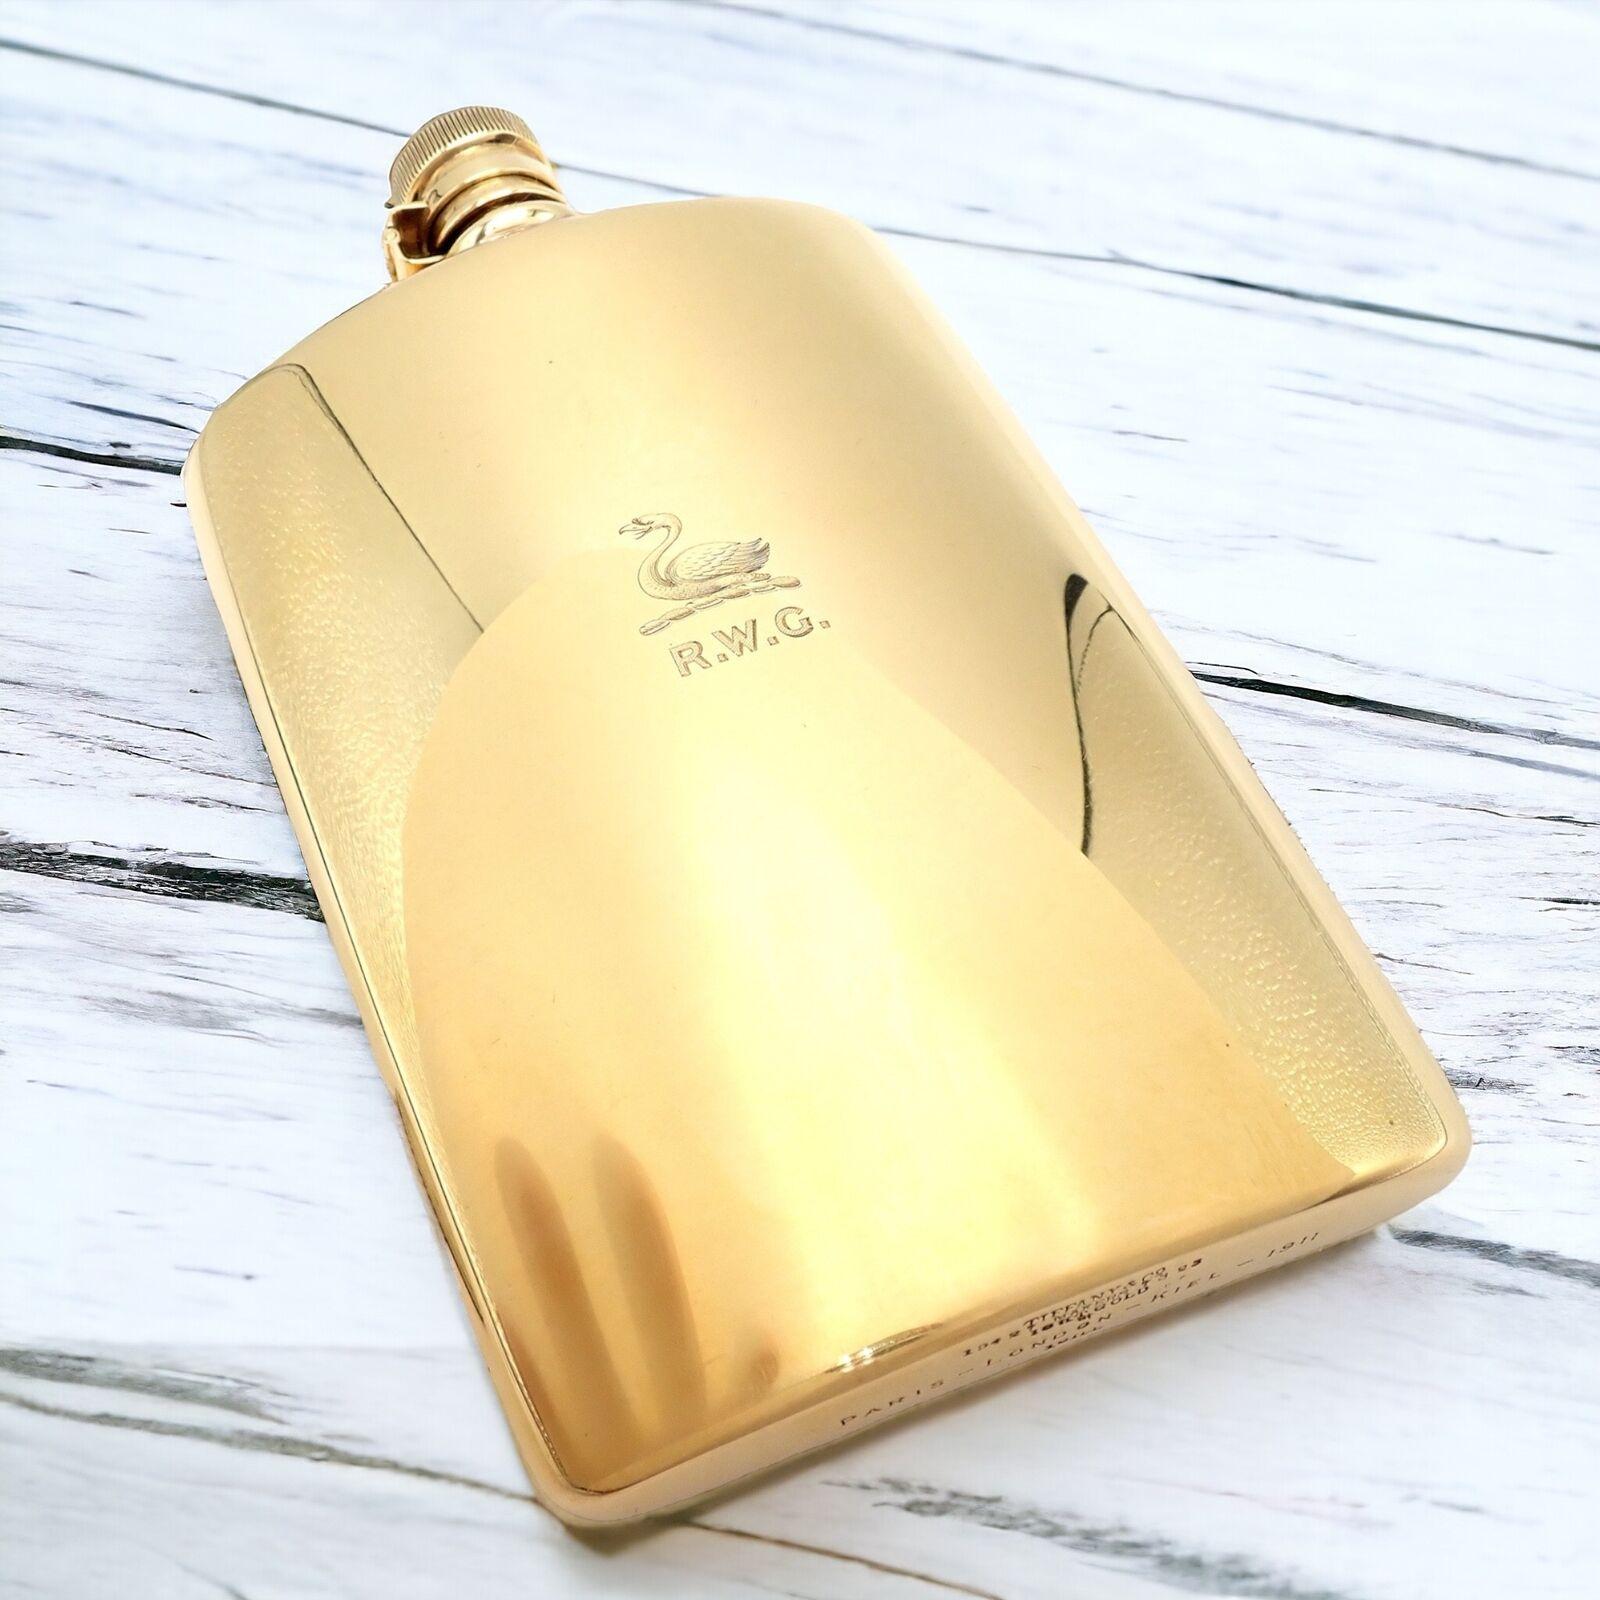 18k Solid Yellow Gold Antique Bottle Flask by Charles Lewis Tiffany & Co Makers. 
An exquisite antique flask from 1911, crafted by Charles Lewis Tiffany and Makers. 
It's made of solid 18k yellow gold, featuring elegant engraving and a unique swan